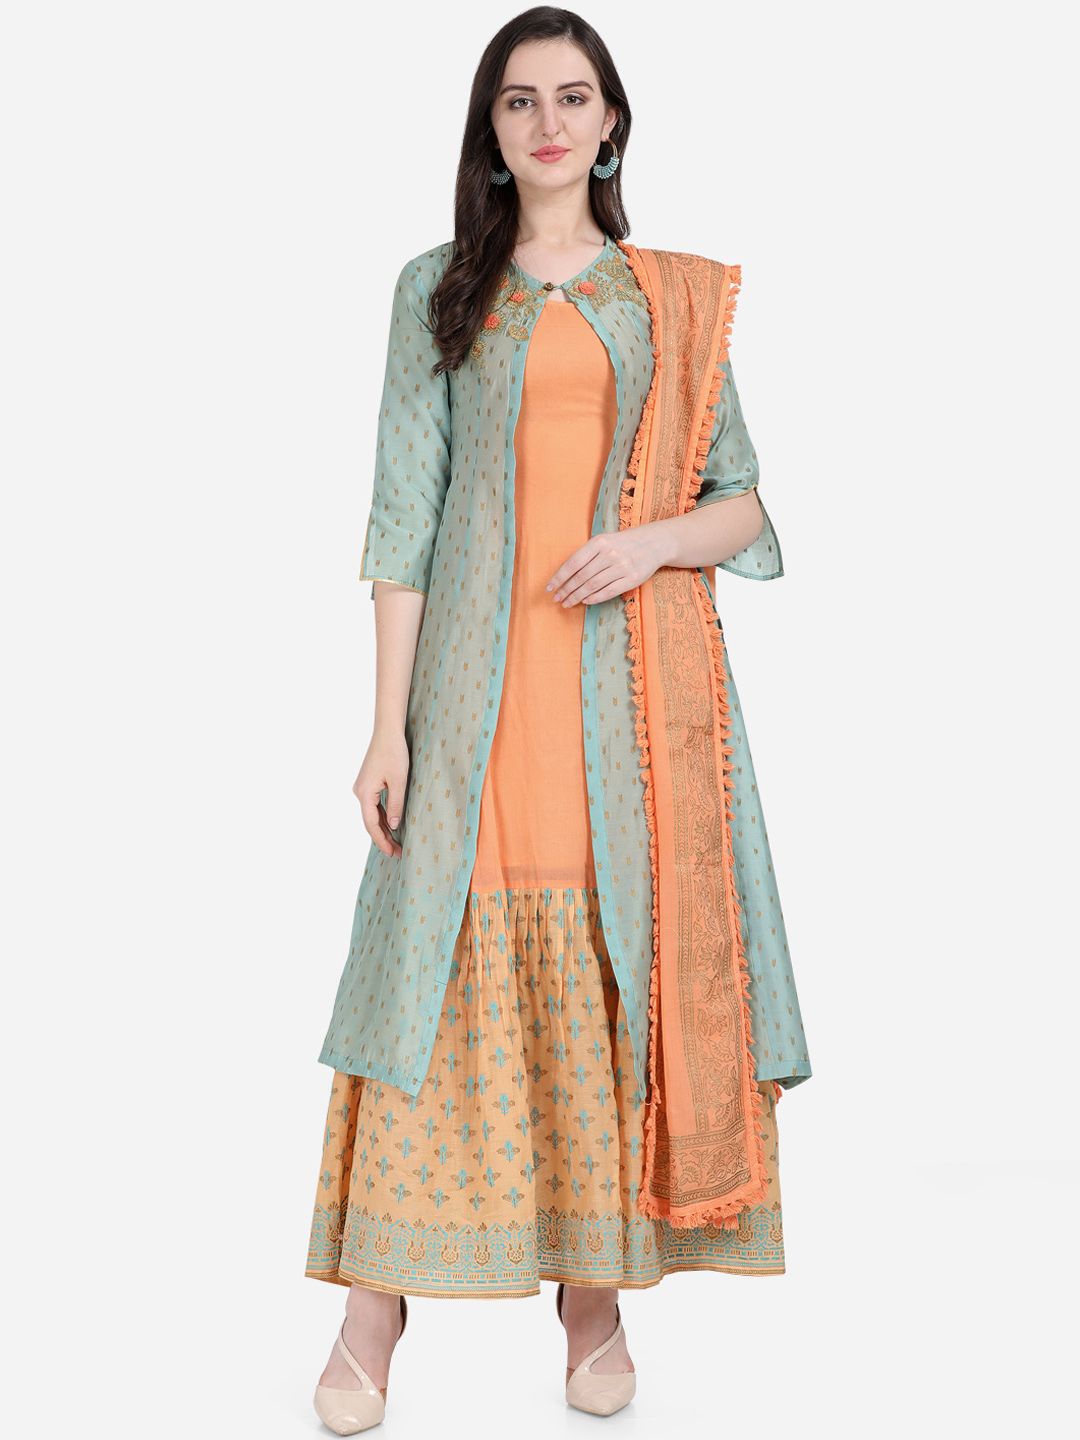 Stylee LIFESTYLE Orange & Turquoise Blue Art Silk Semi-Stitched Dress Material Price in India